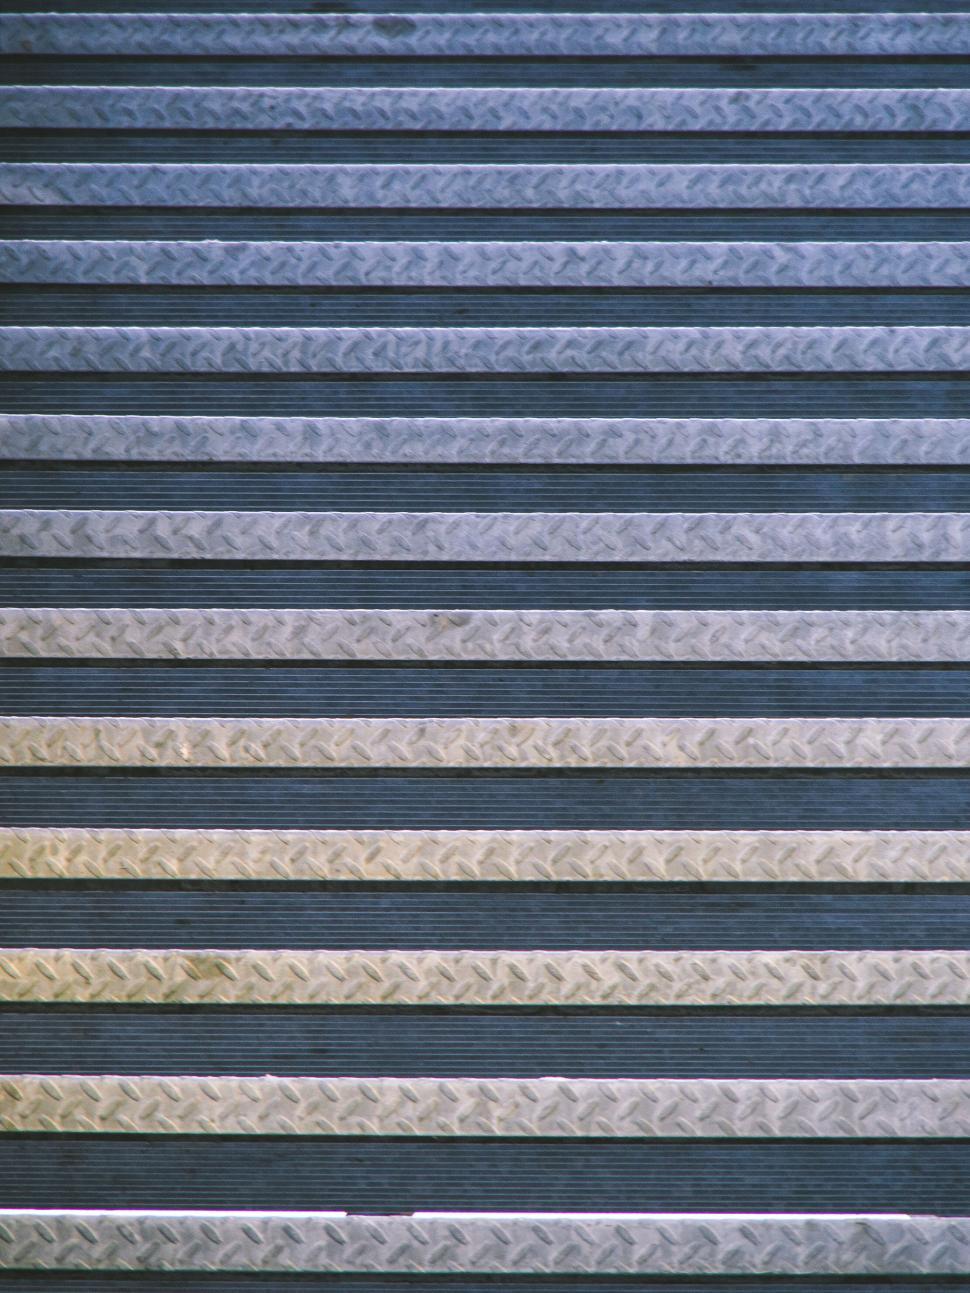 Free Image of Patterned industrial metal shutter texture 